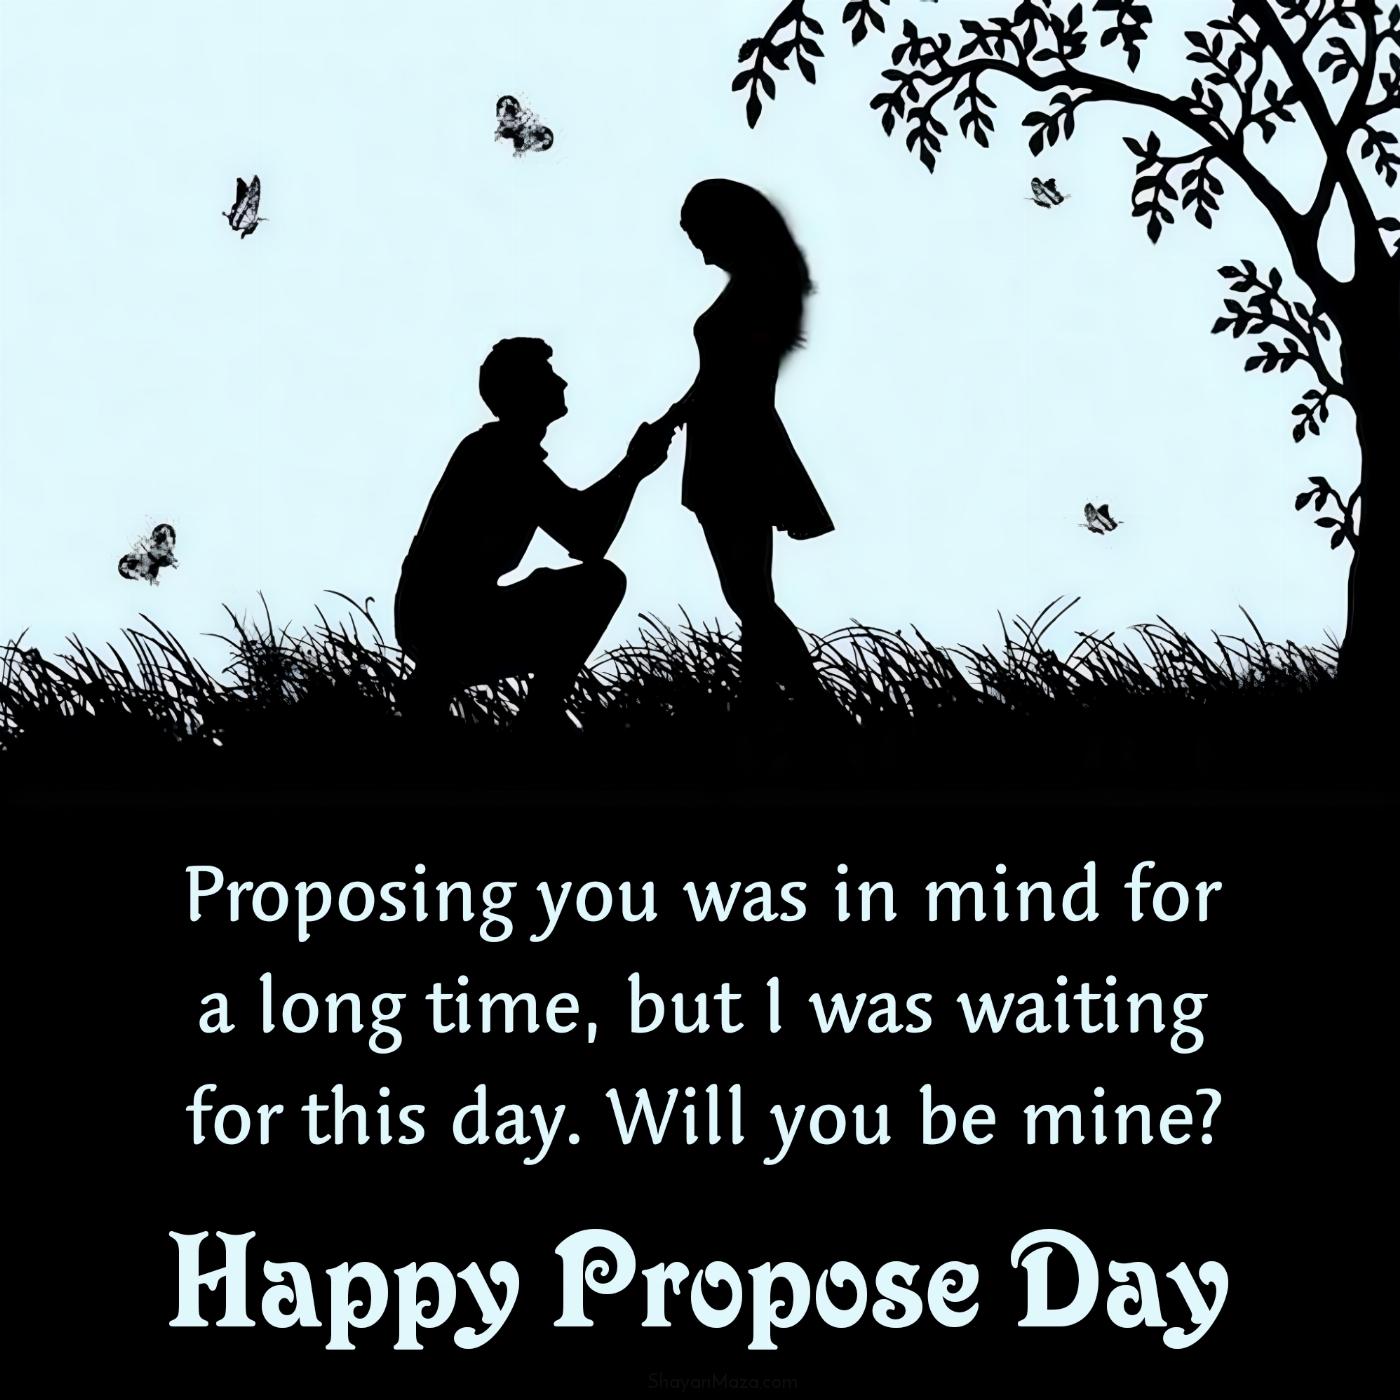 Proposing you was in mind for a long time